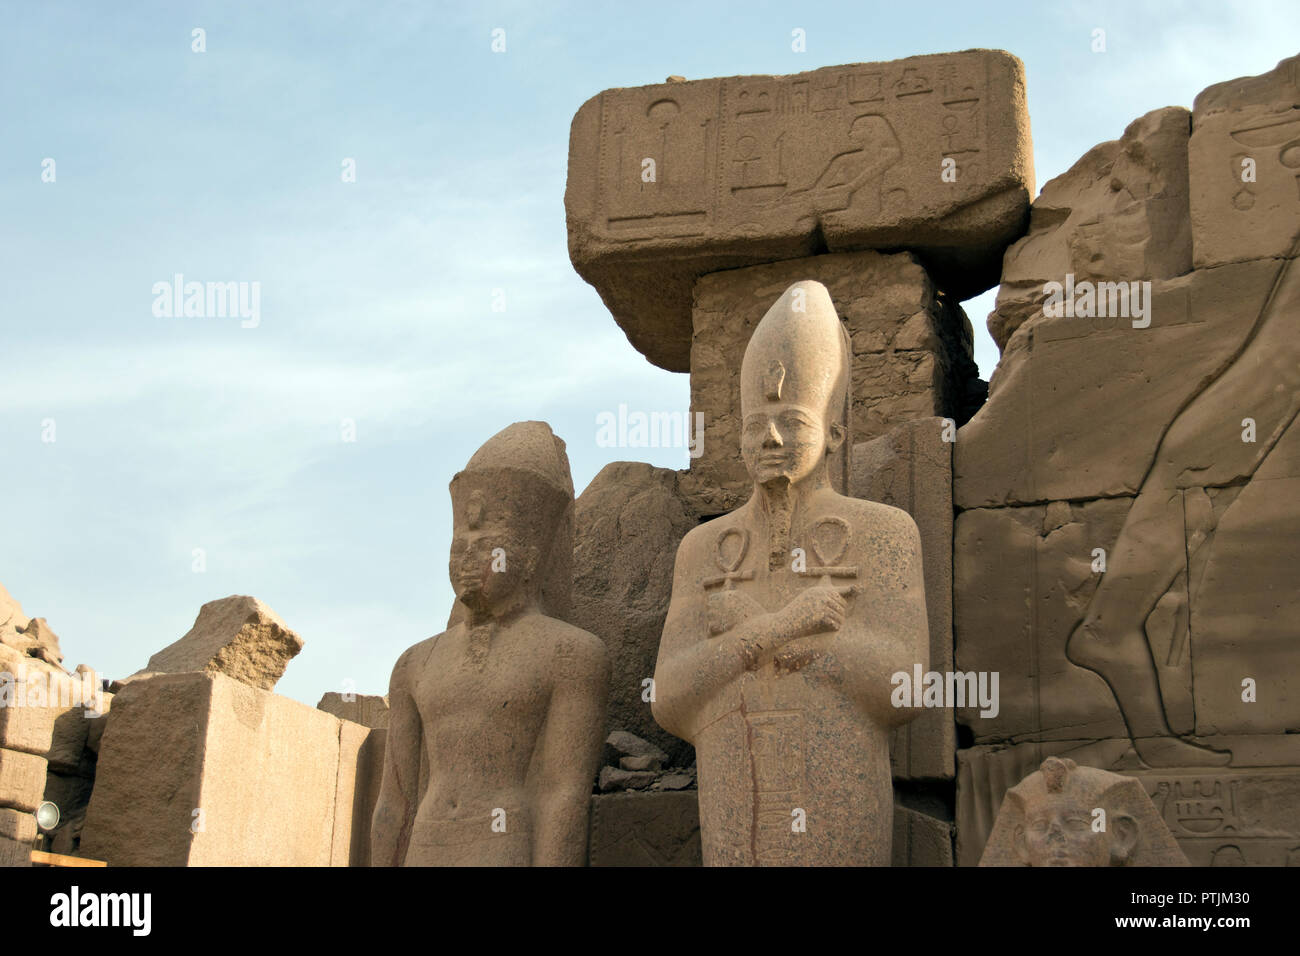 A statue of a pharaoh holding two ankhs, at the Karnak Temple complex at Luxor, Egypt. Stock Photo